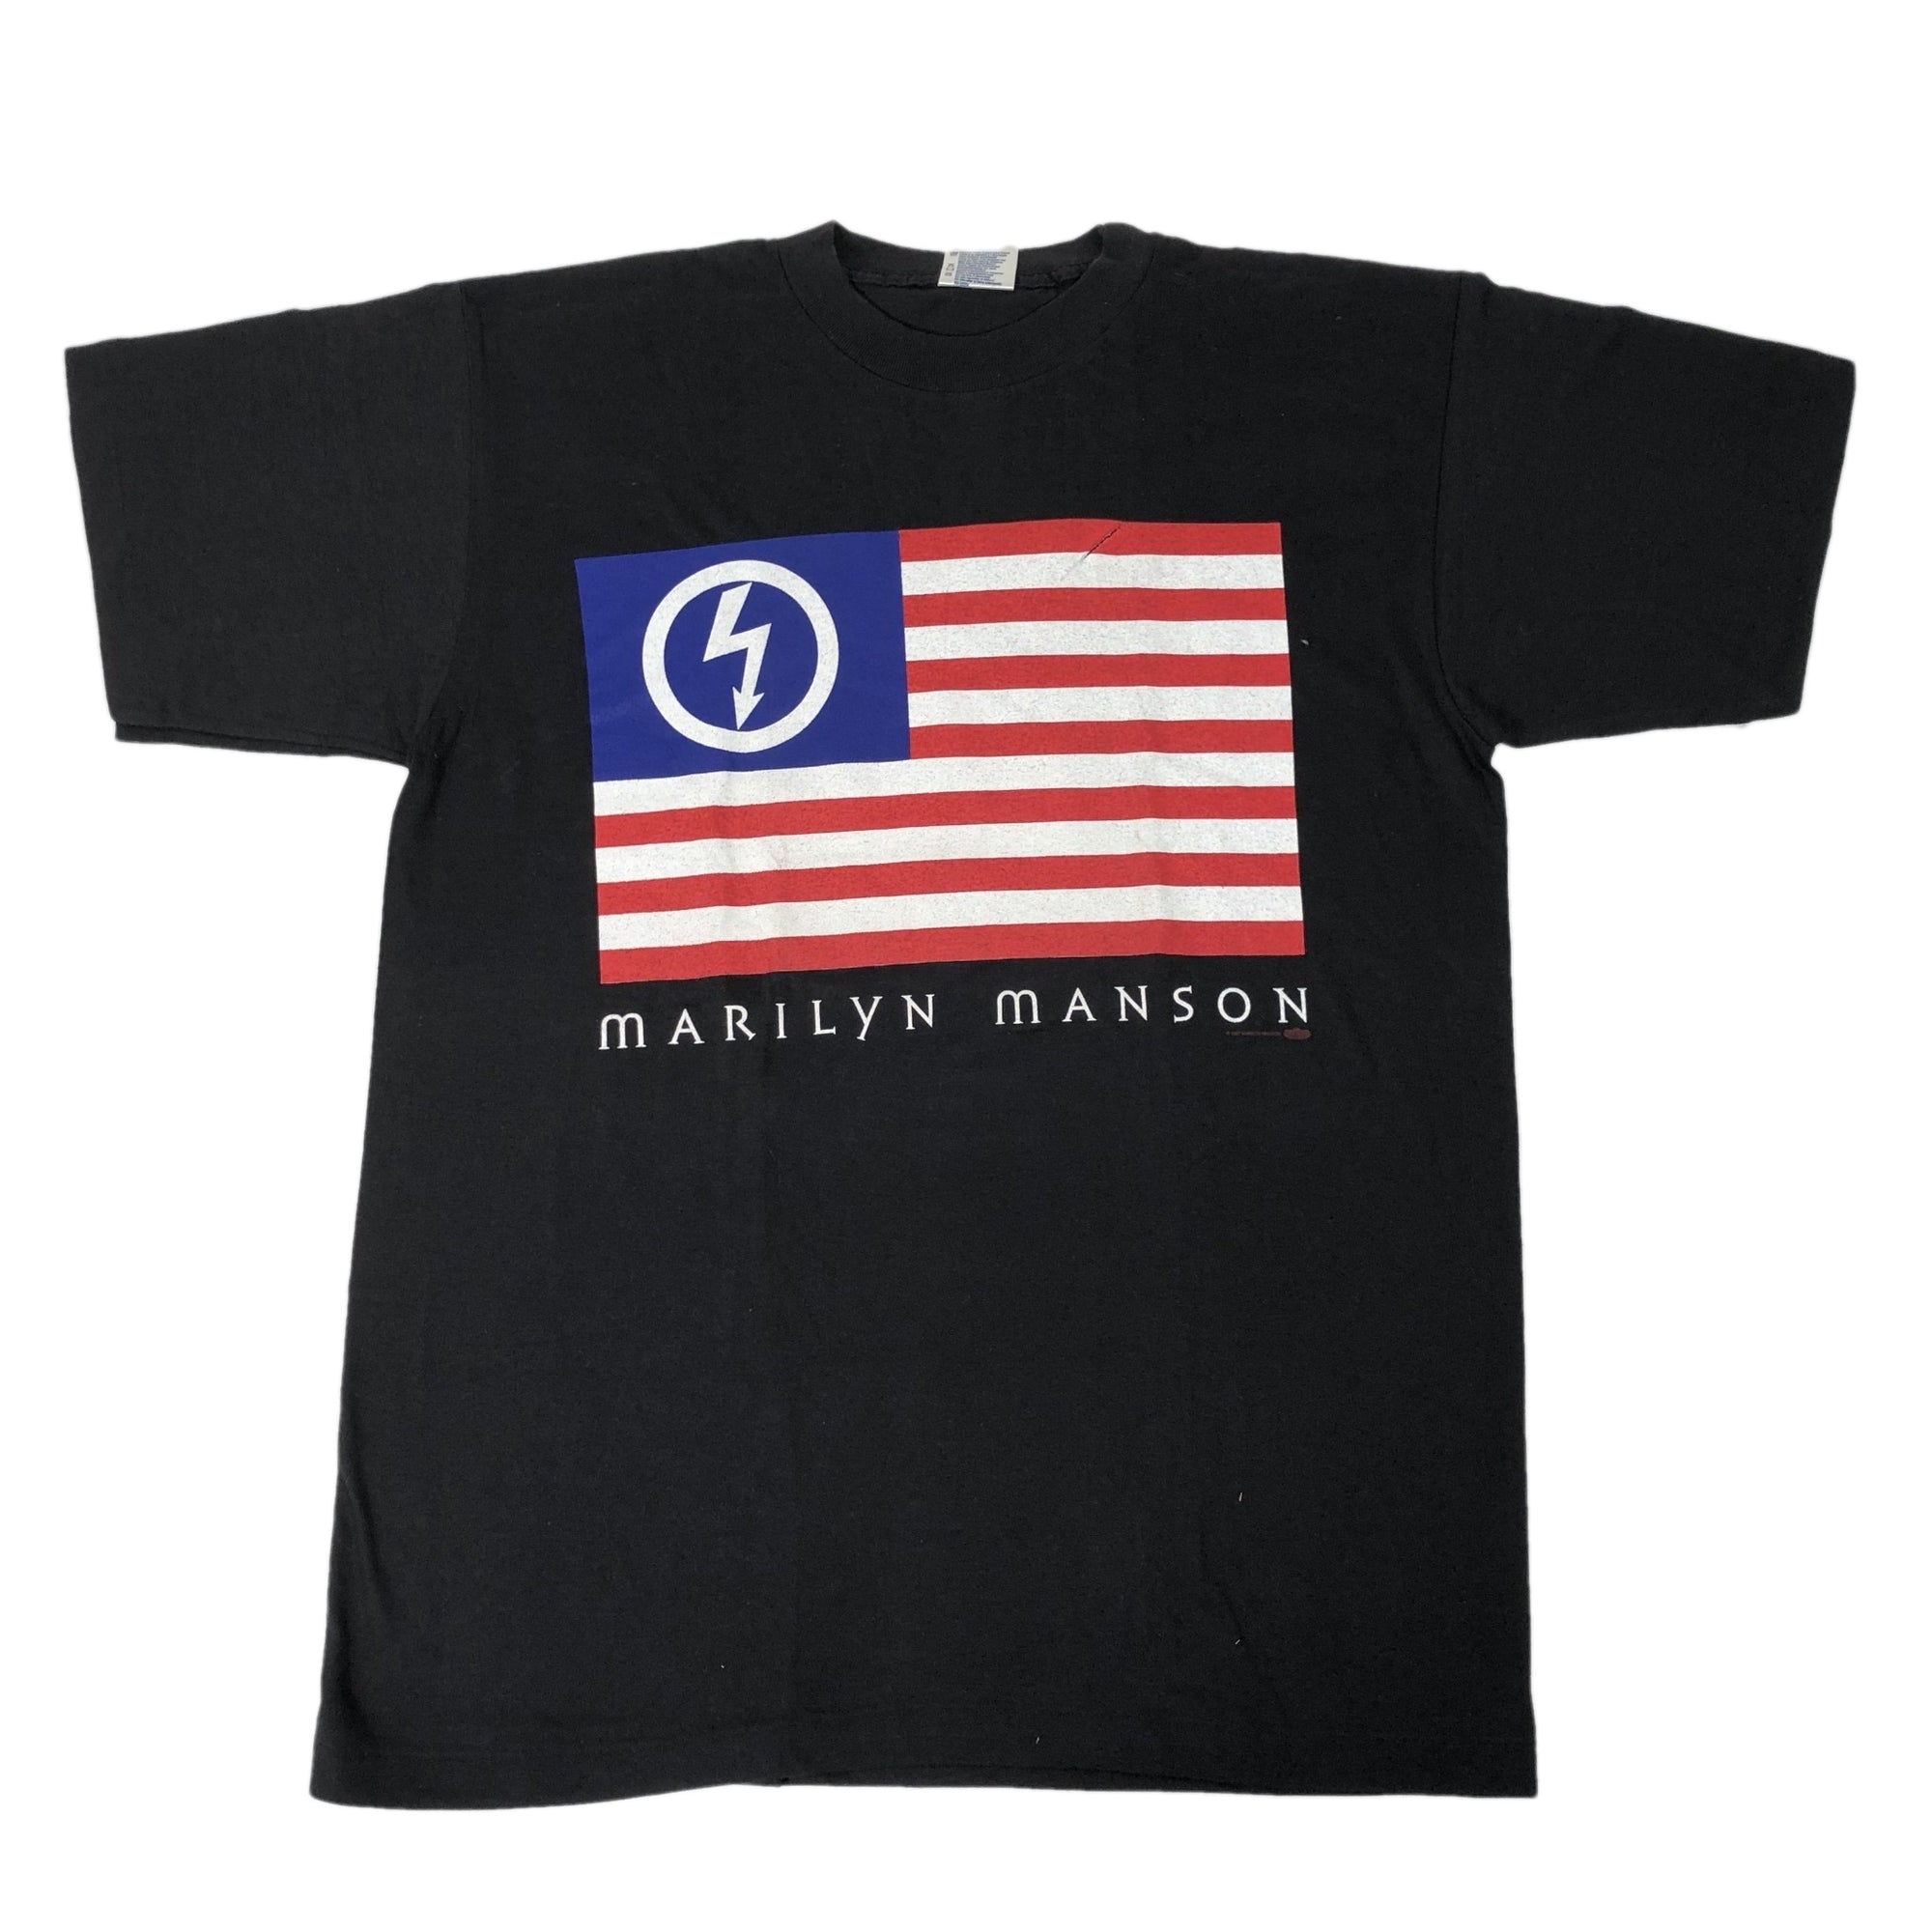 Vintage Marilyn Manson "American By Birth Antichrist By Choice" T-Shirt - jointcustodydc